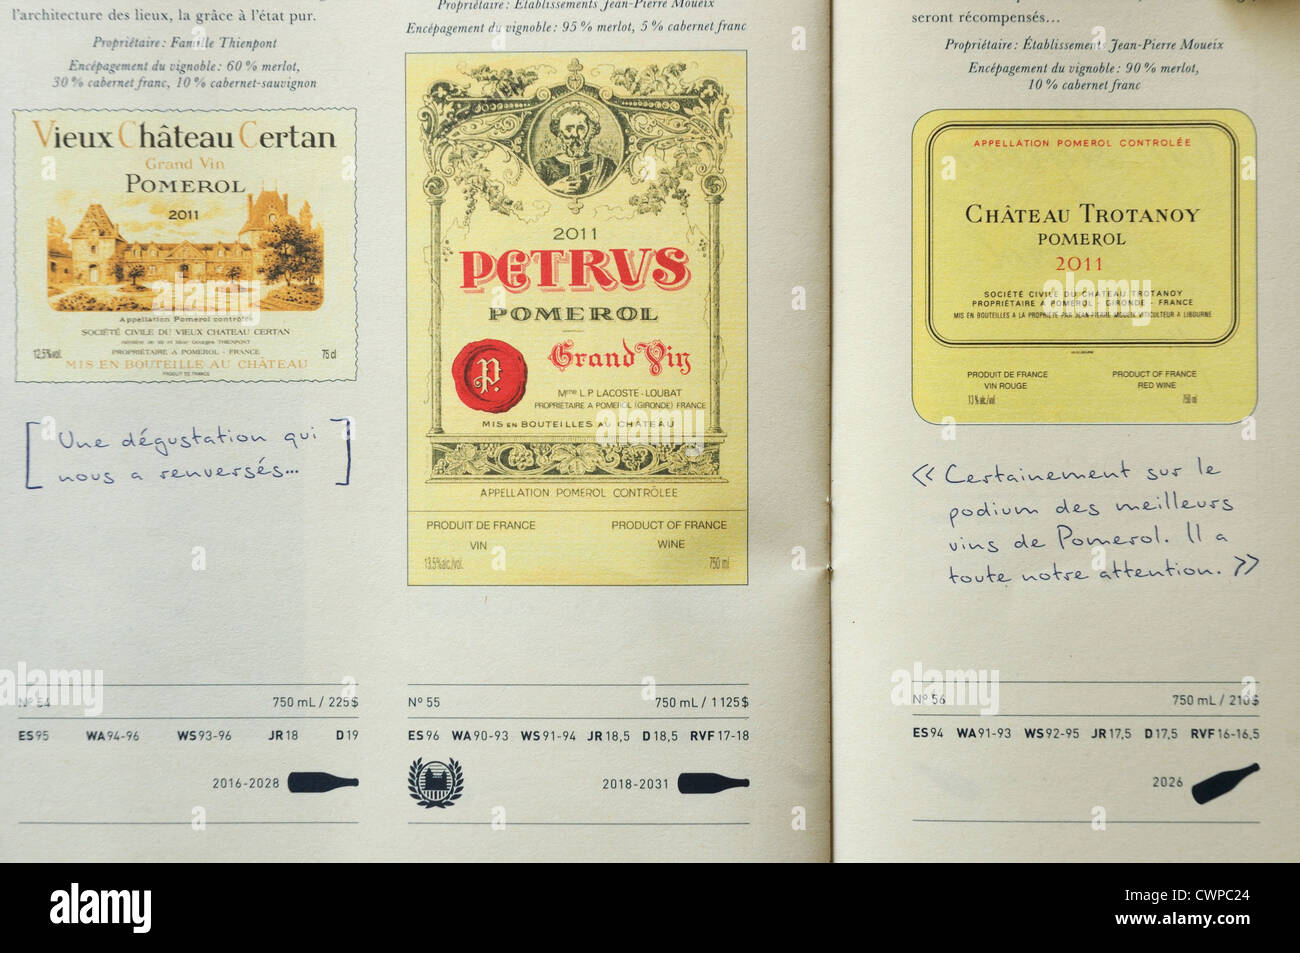 A fine wine catalogue featuring Petrus and other Pomerol wines 2011 en primeur Stock Photo